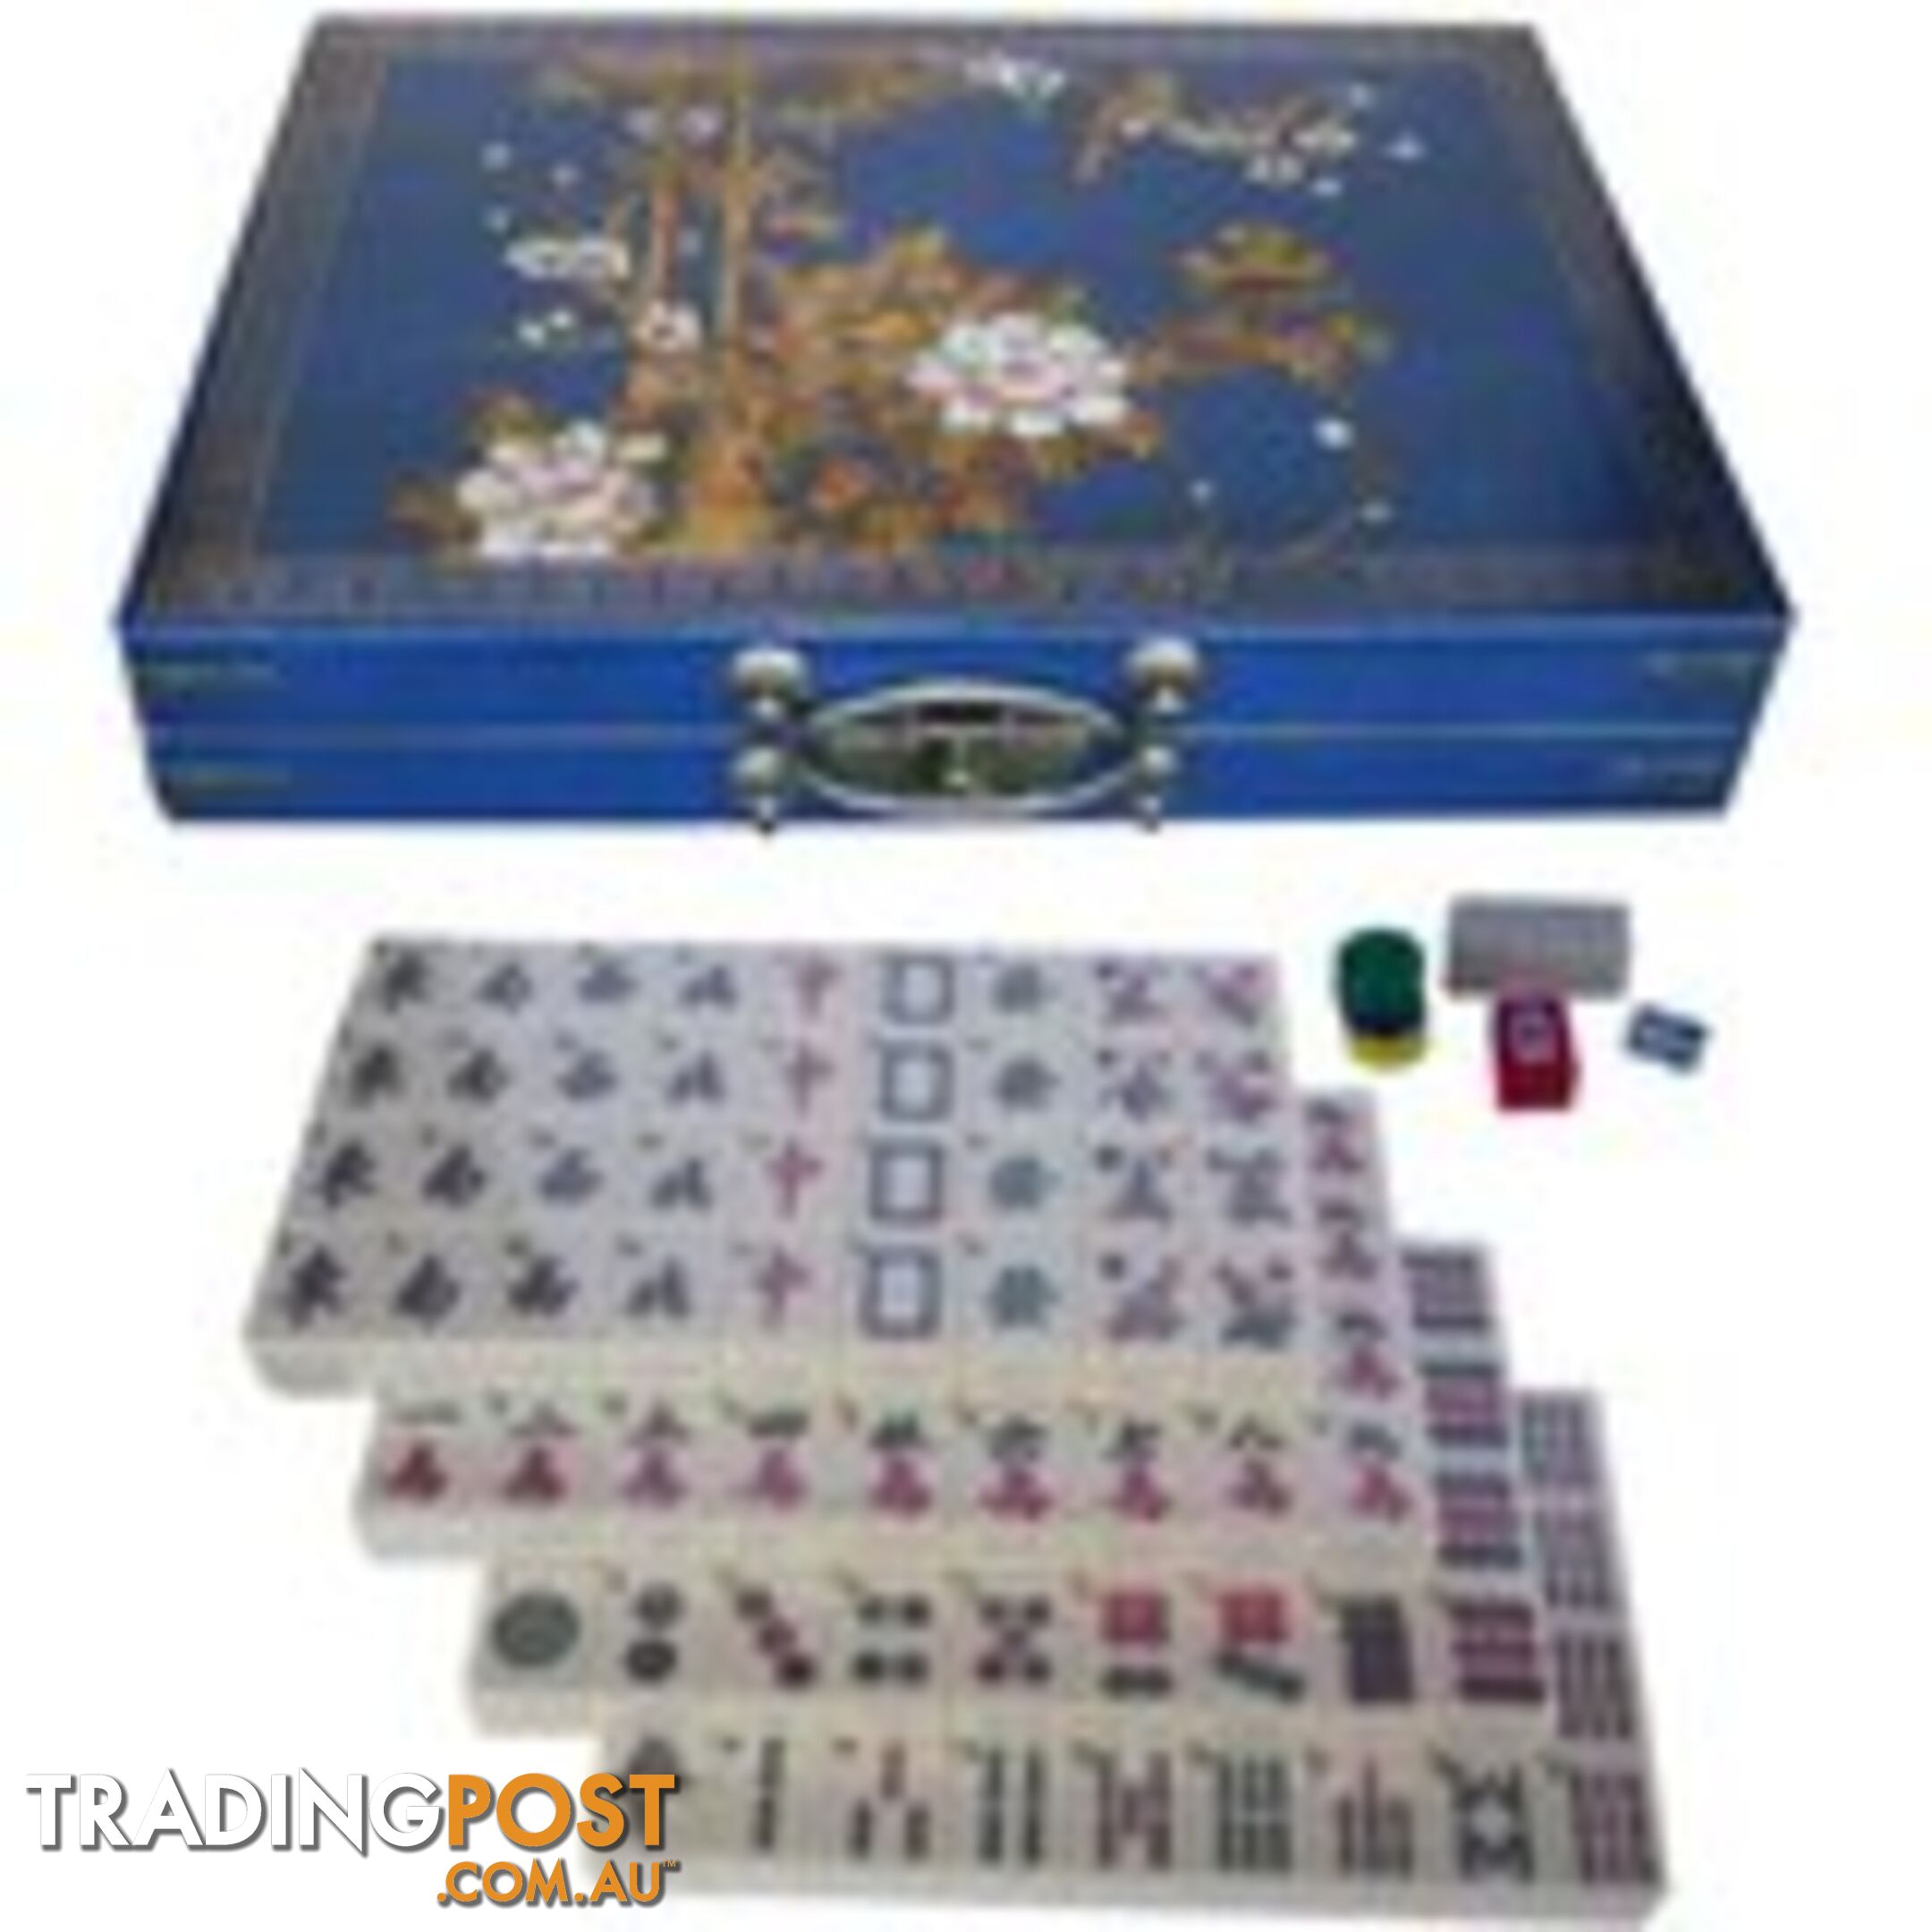 Large Mahjong Set in Blue Painted Case